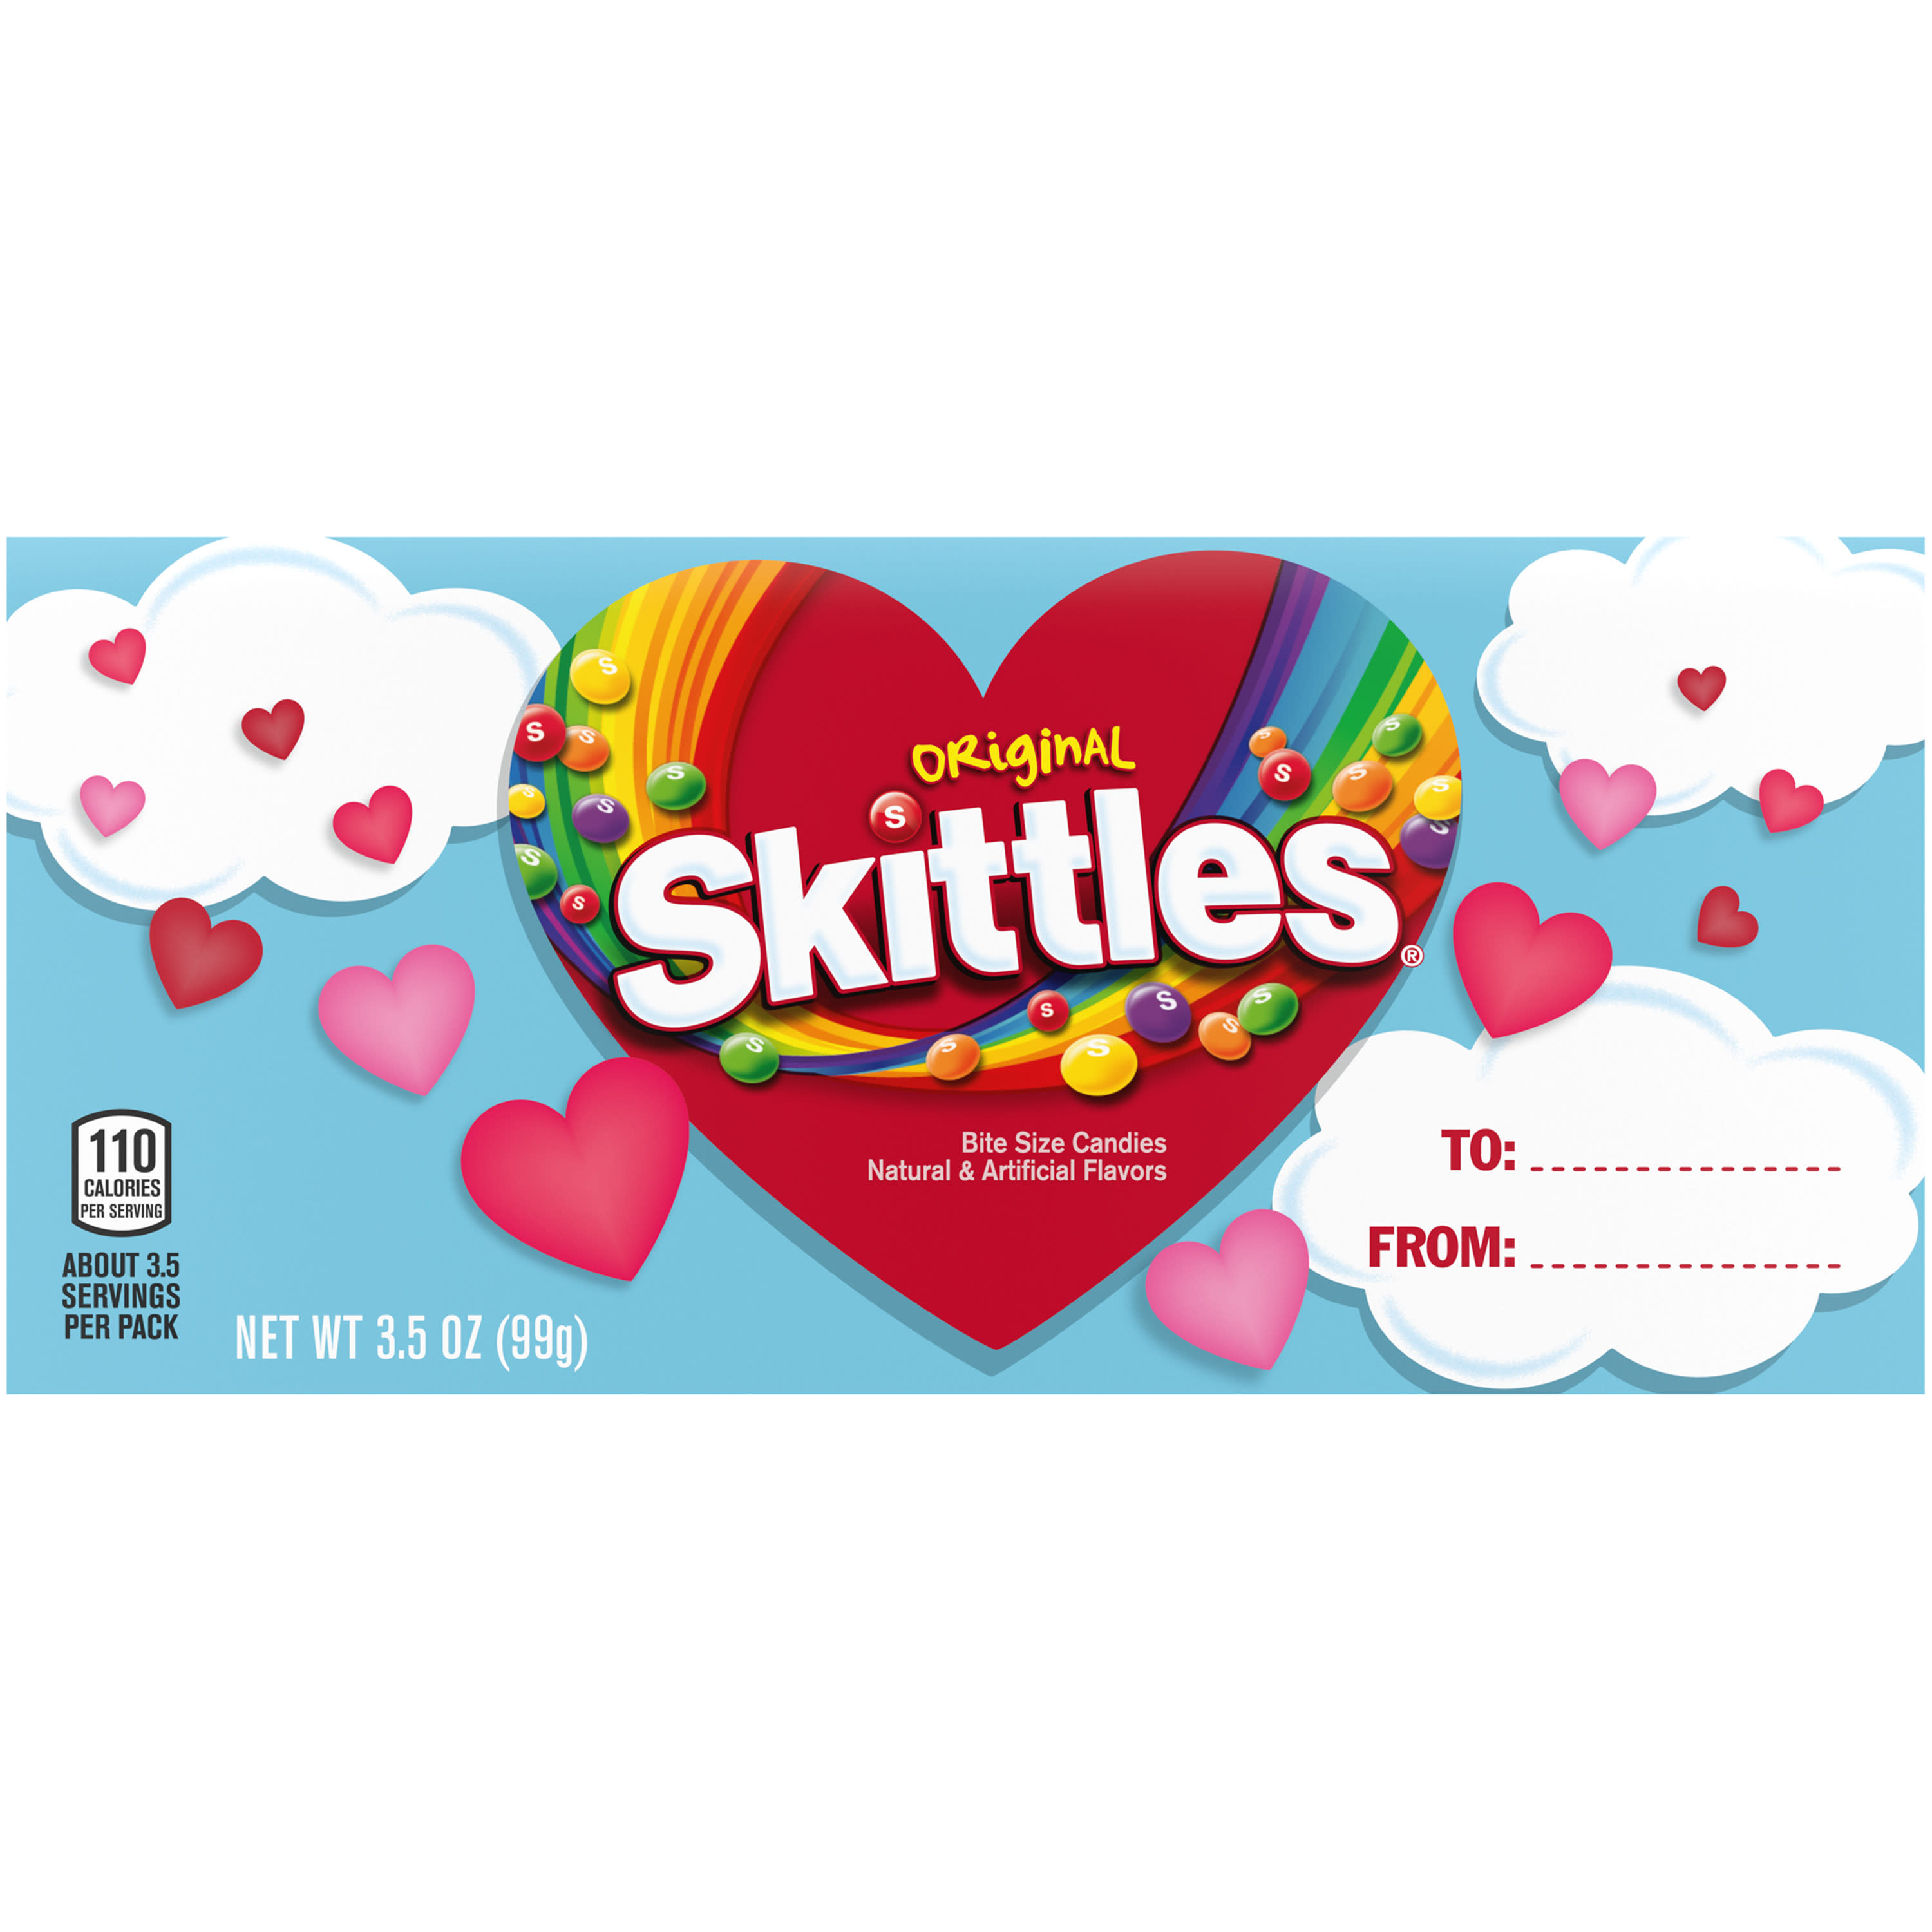 Skittles Original Chewy Candy Valentines Candy Box - 3.5 oz - image 1 of 13